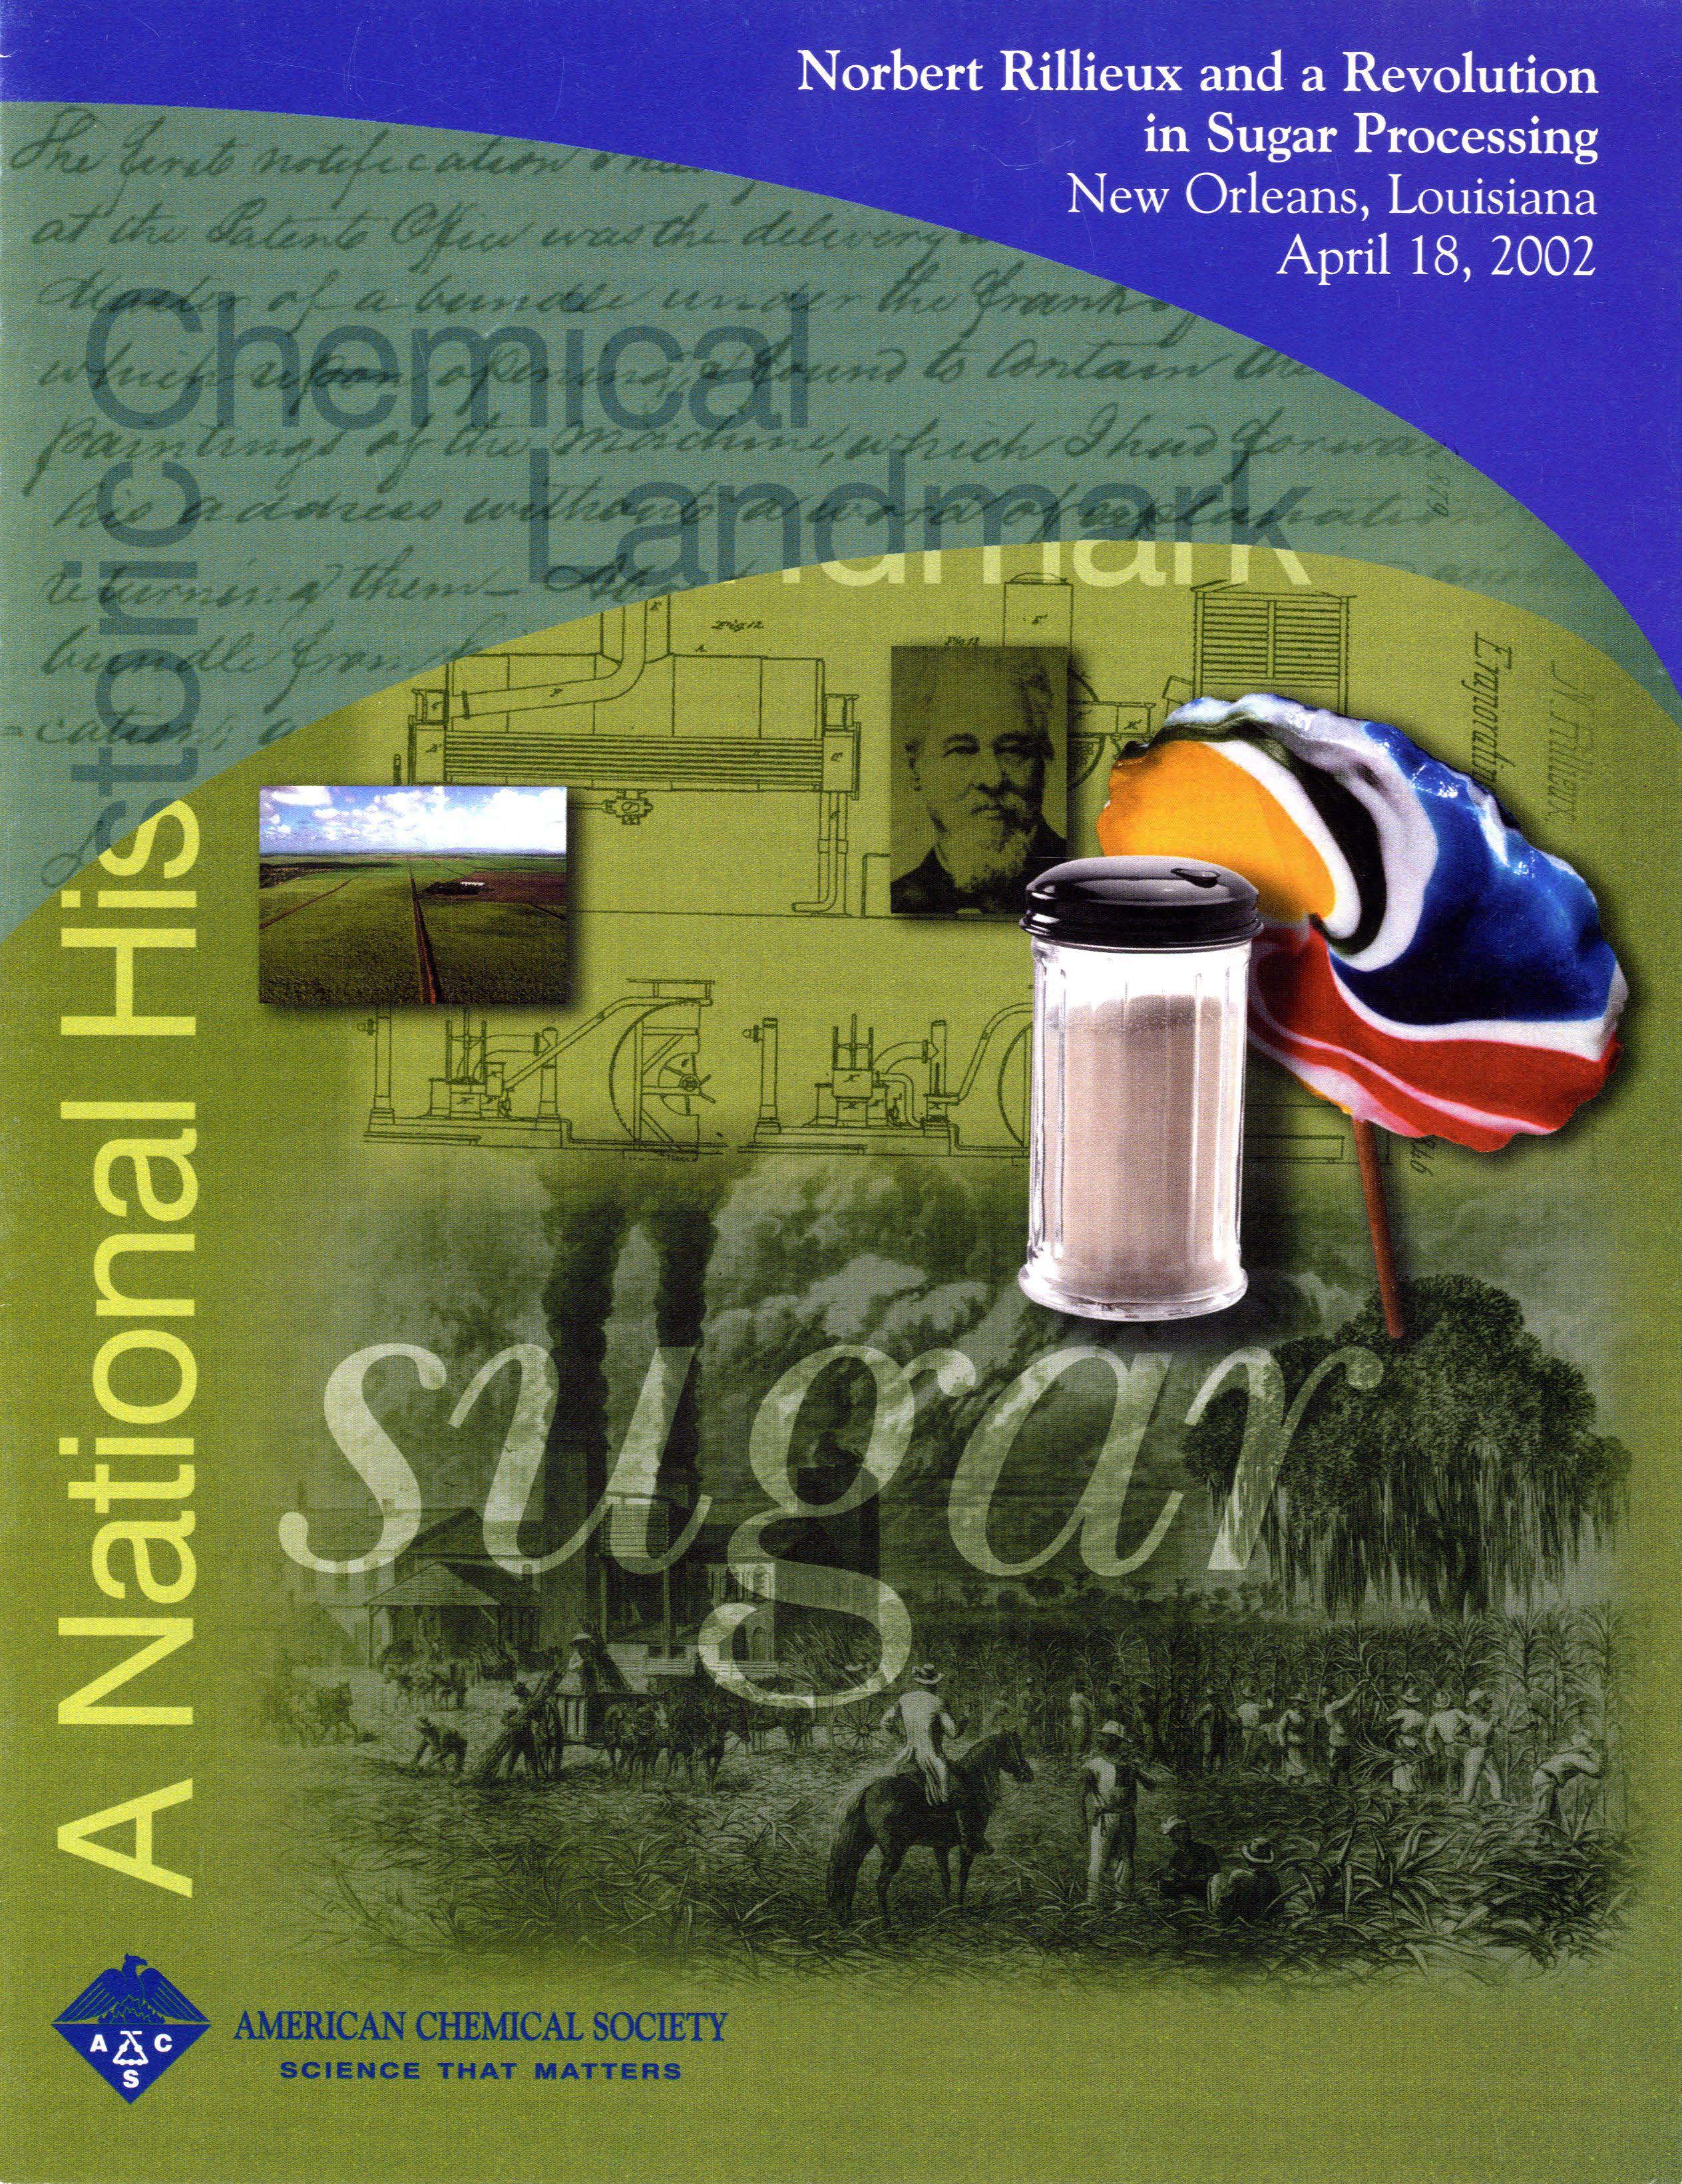 “Norbert Rillieux and a Revolution in Sugar Processing” commemorative booklet 